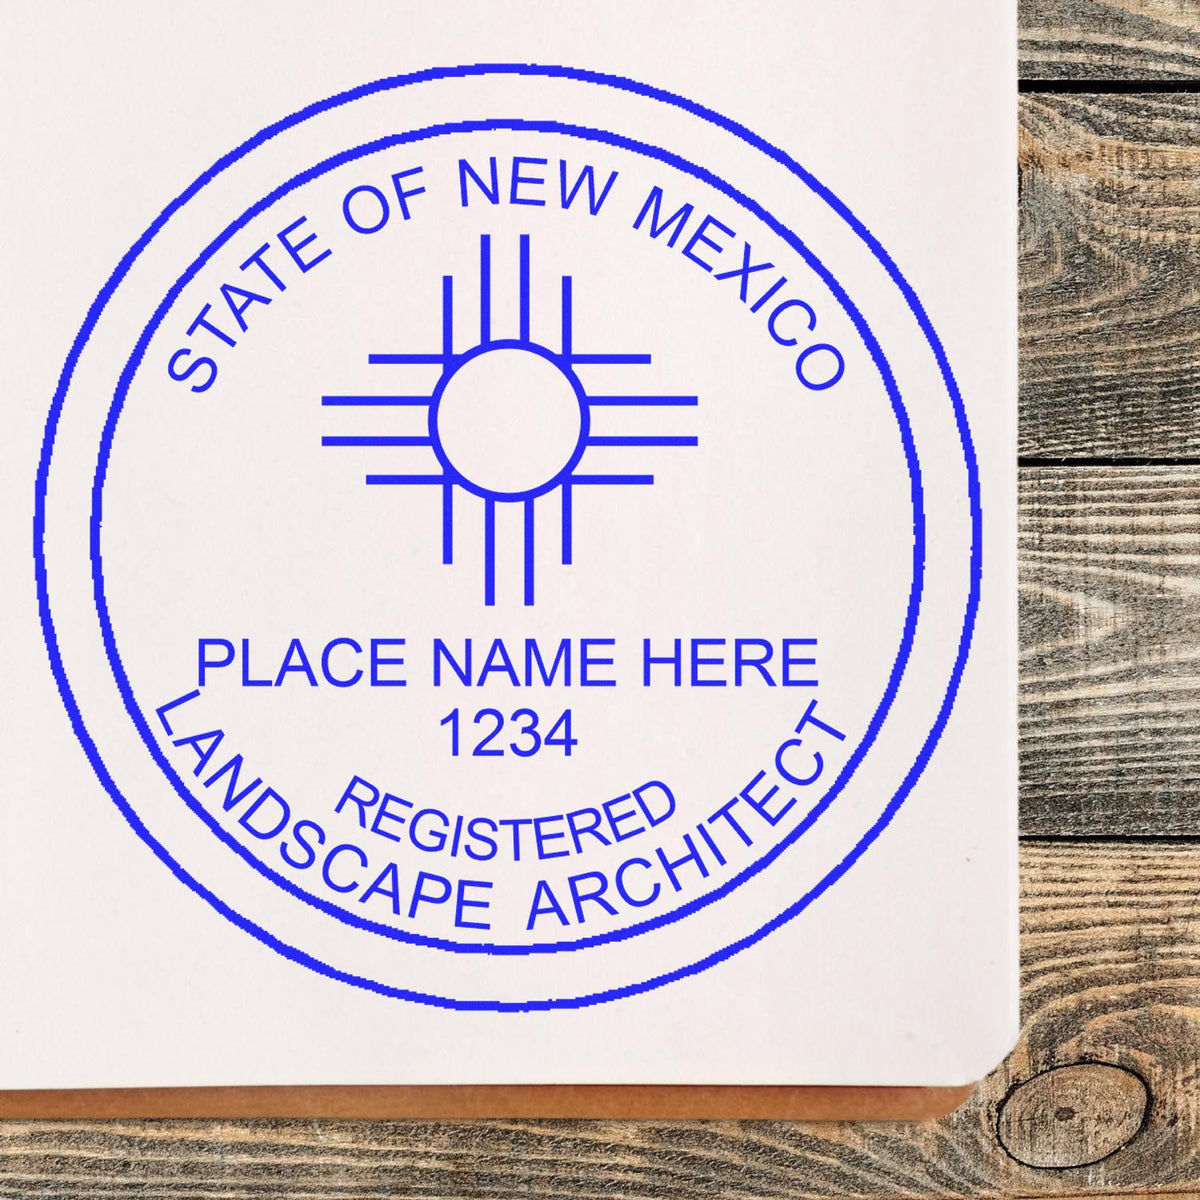 New Mexico Landscape Architectural Seal Stamp in use photo showing a stamped imprint of the New Mexico Landscape Architectural Seal Stamp